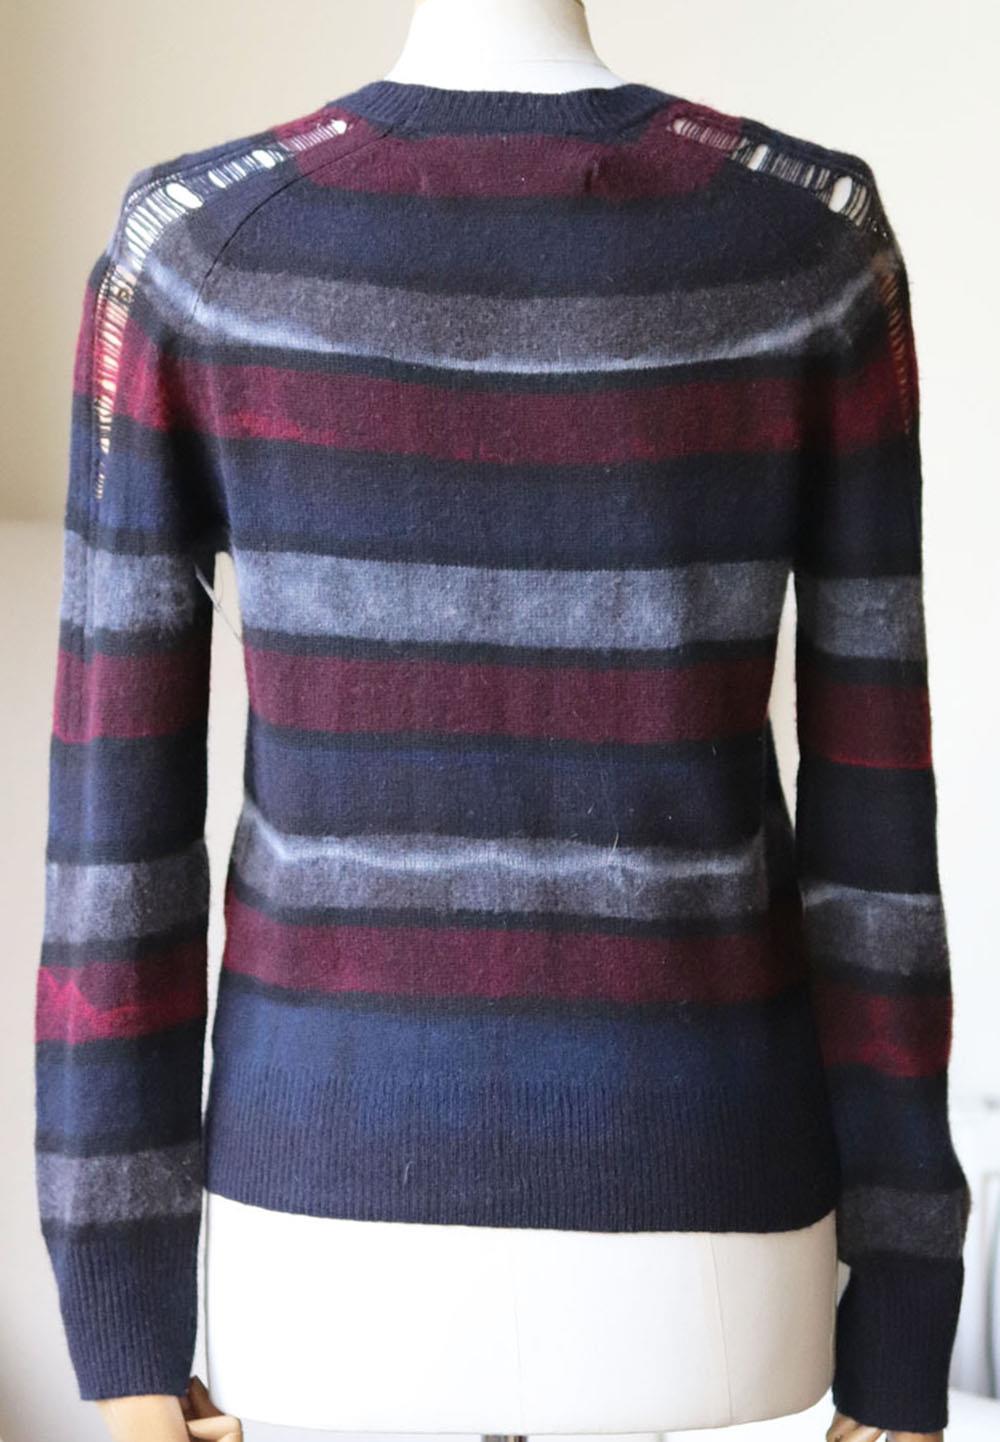 RAQUEL ALLEGRA DISTRESSED TIE DYED MERINO WOOL AND CASHMERE BLEND SWEATER UK 6